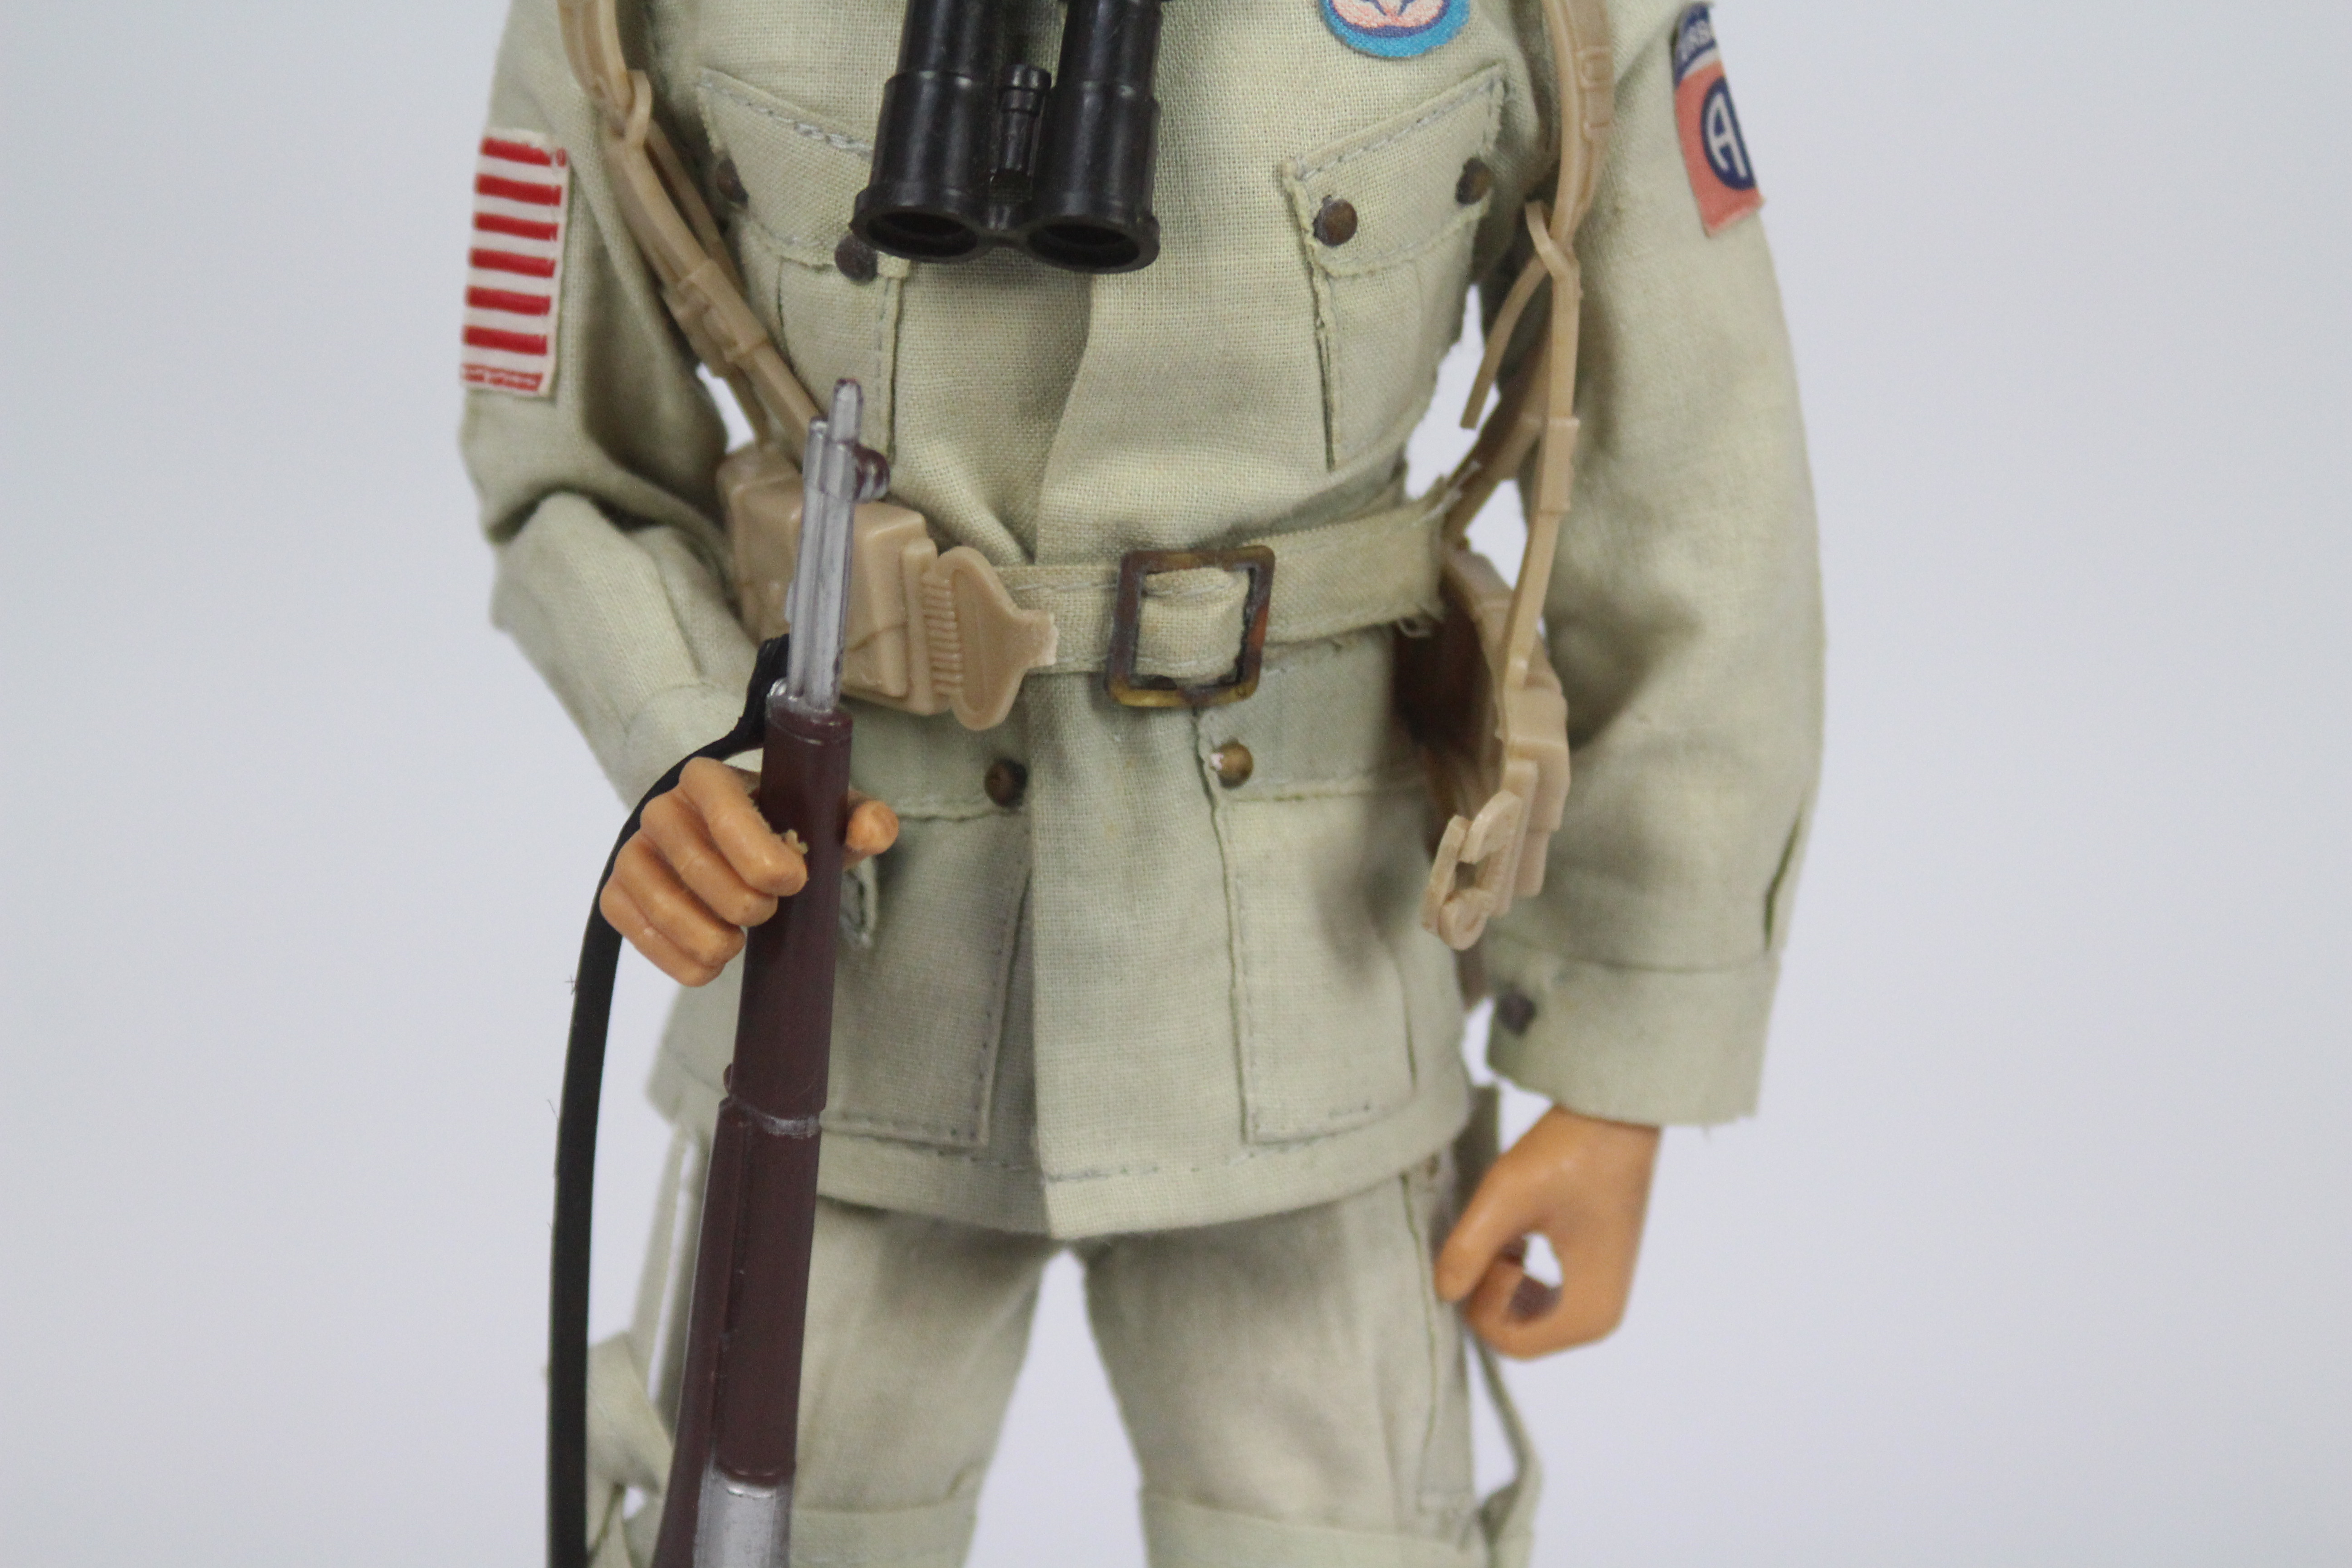 Palitoy, Action Man - A Palitoy Action Man figure in US Paratrooper outfit. - Image 4 of 7